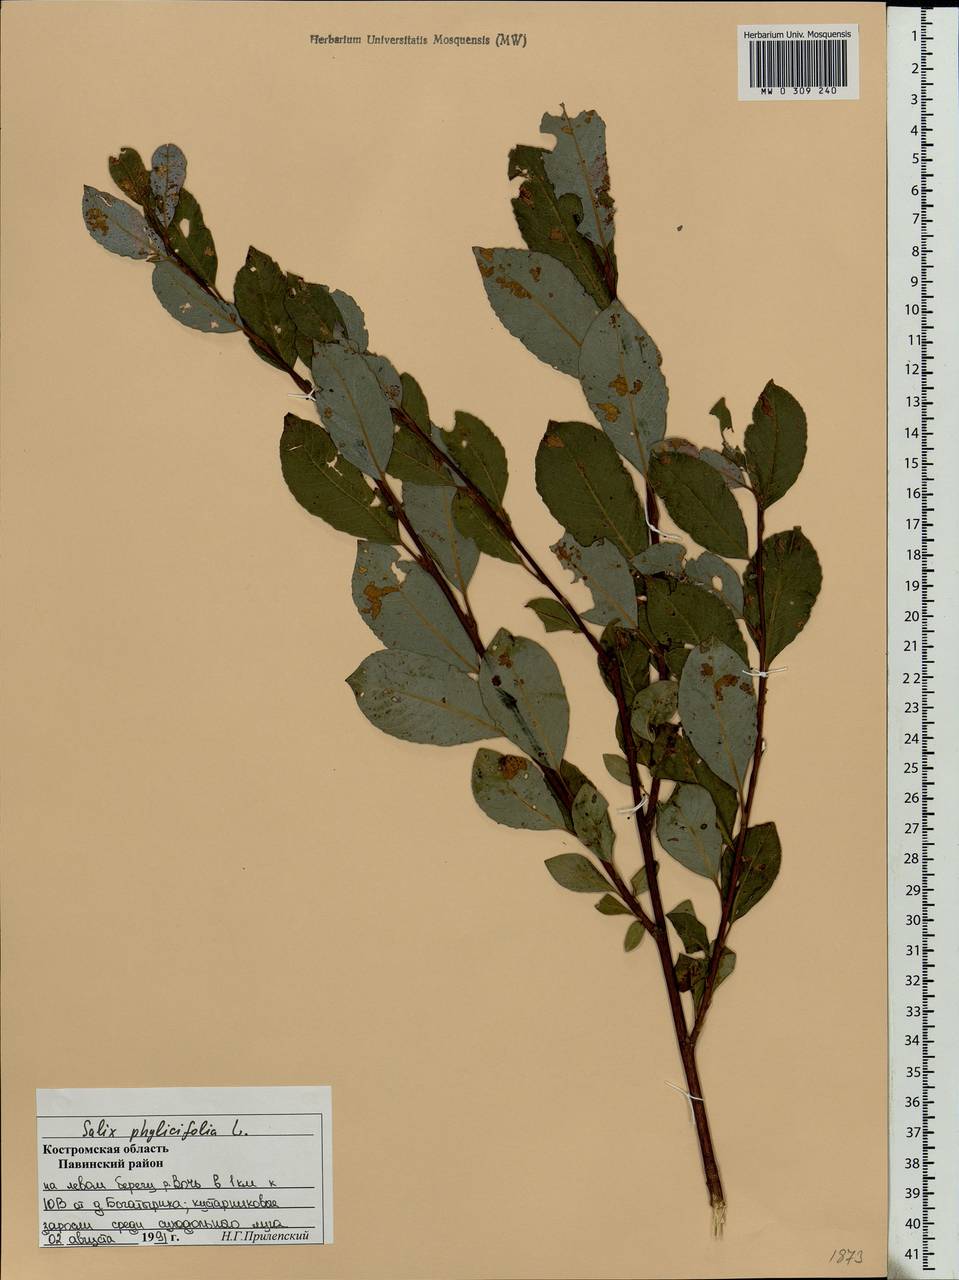 Salix phylicifolia L., Eastern Europe, Central forest region (E5) (Russia)